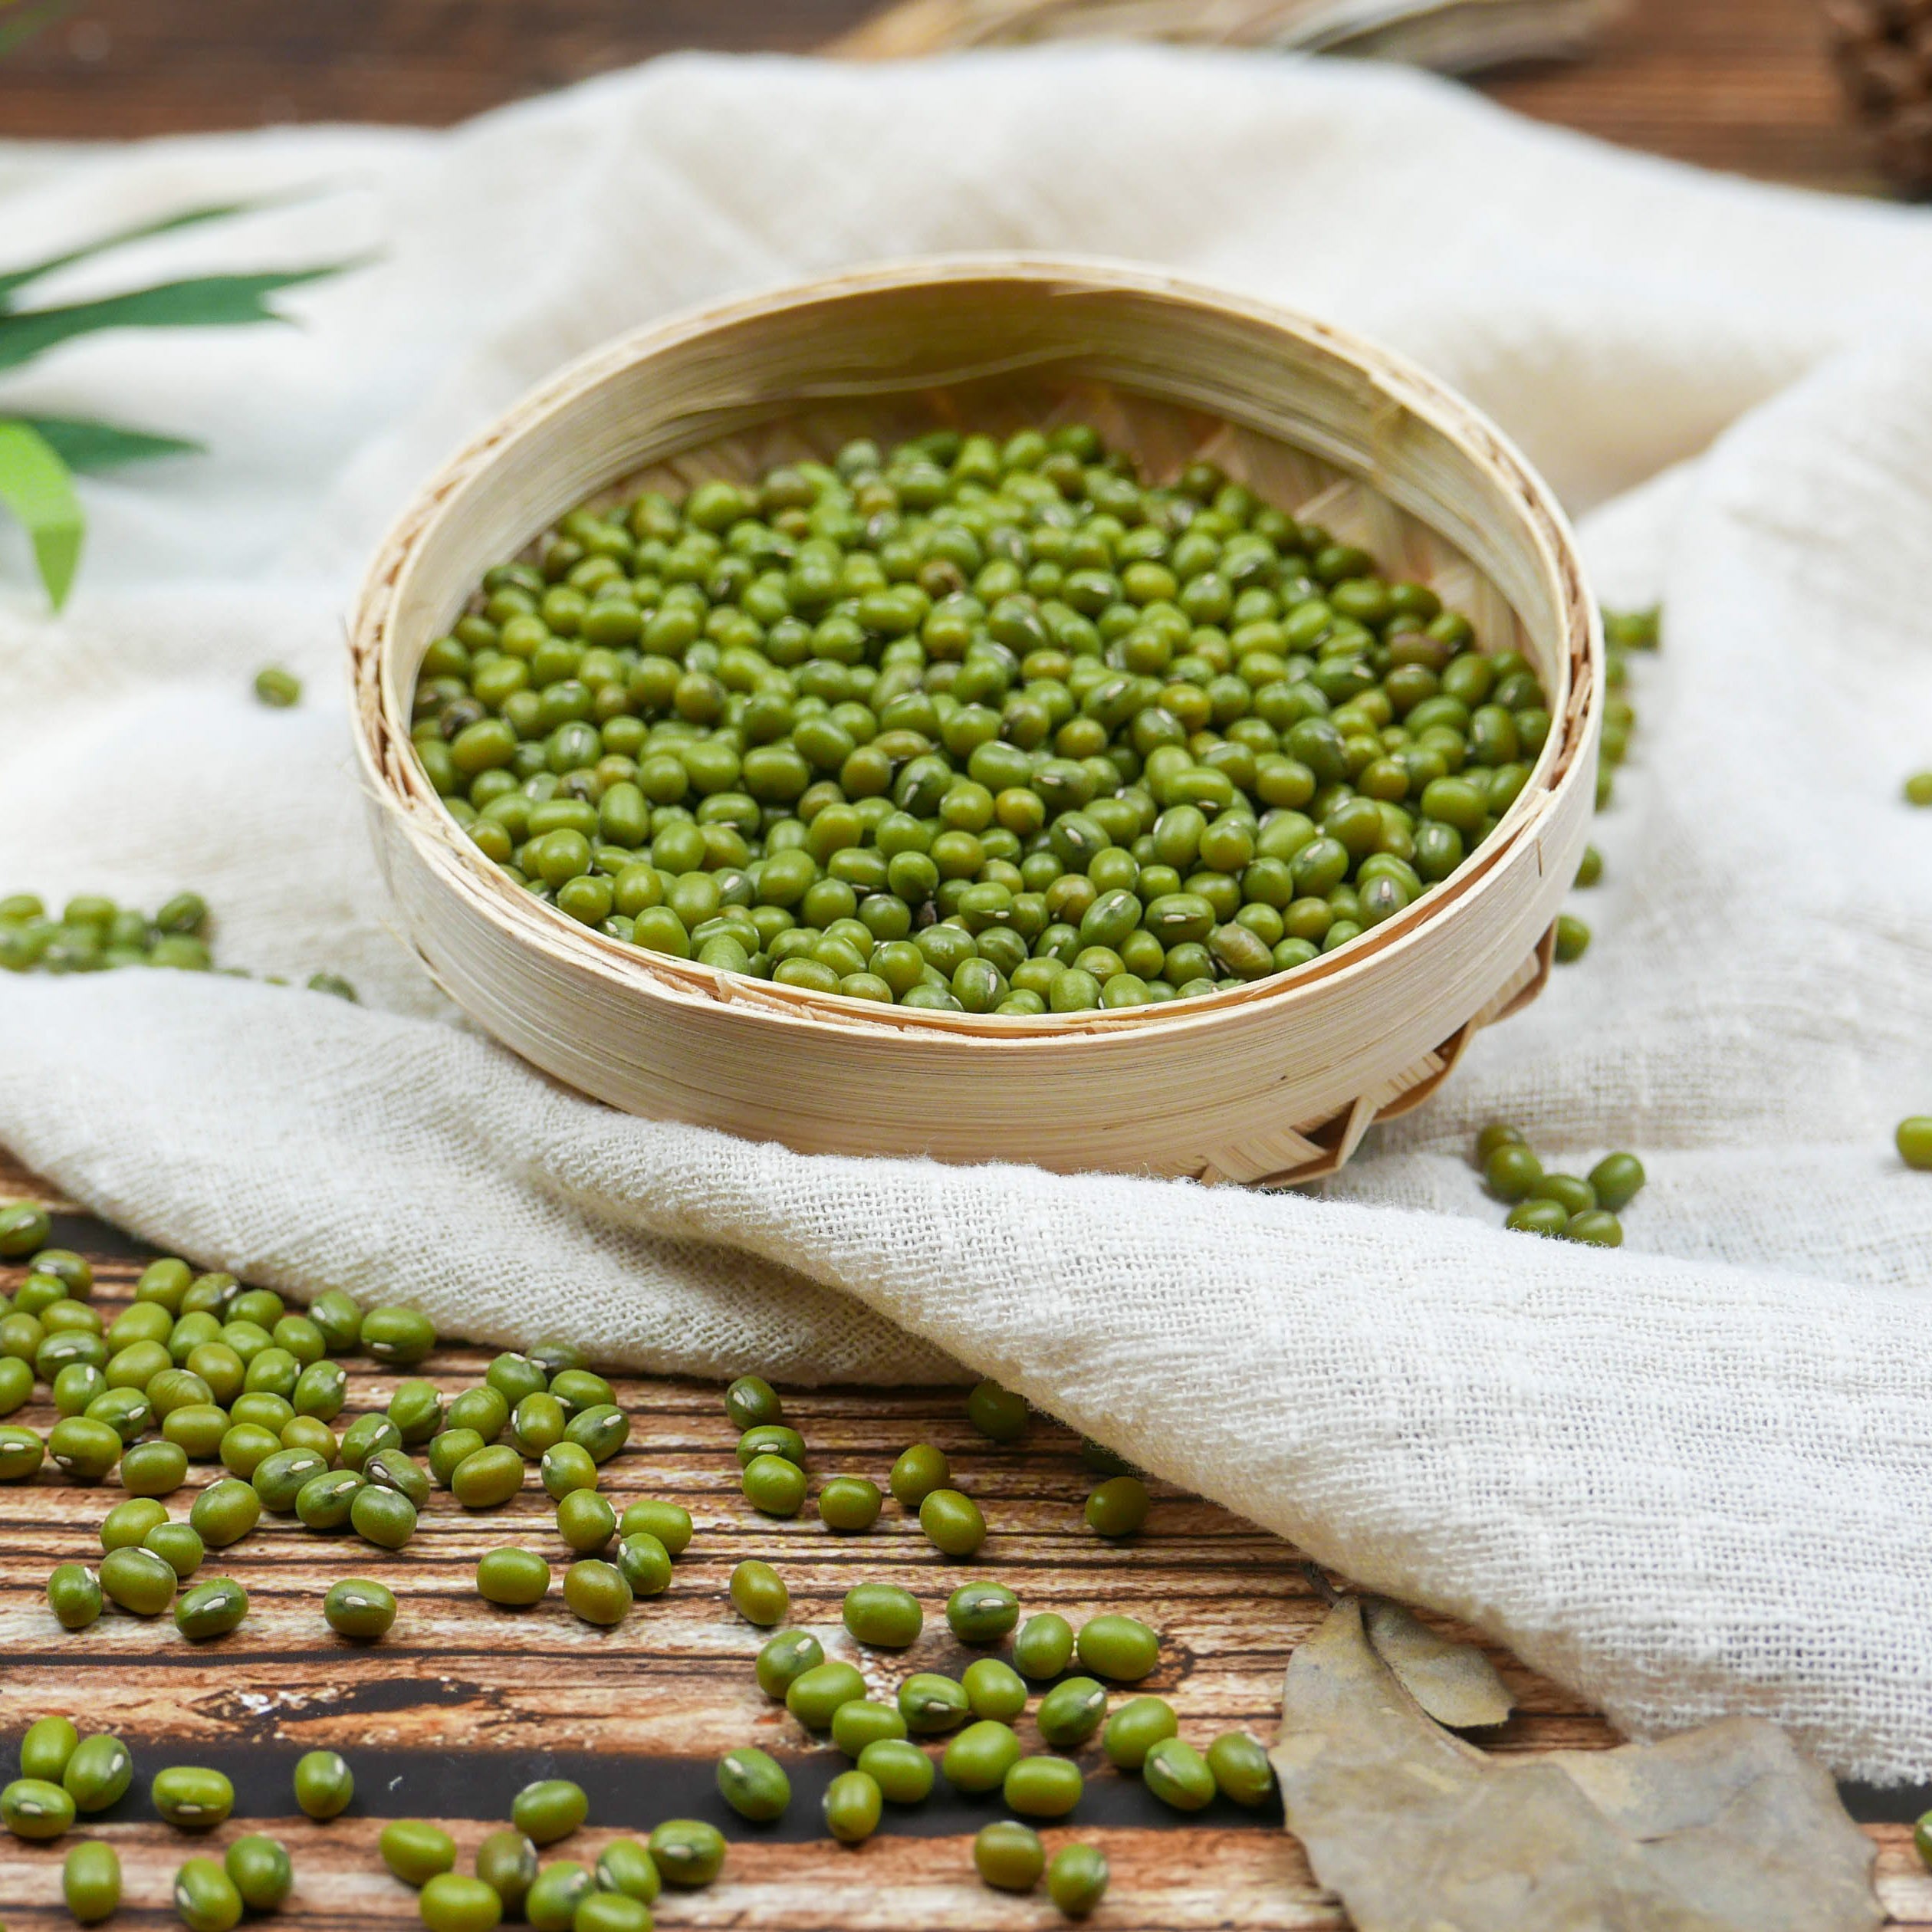 Small round organic green mung beans for ome